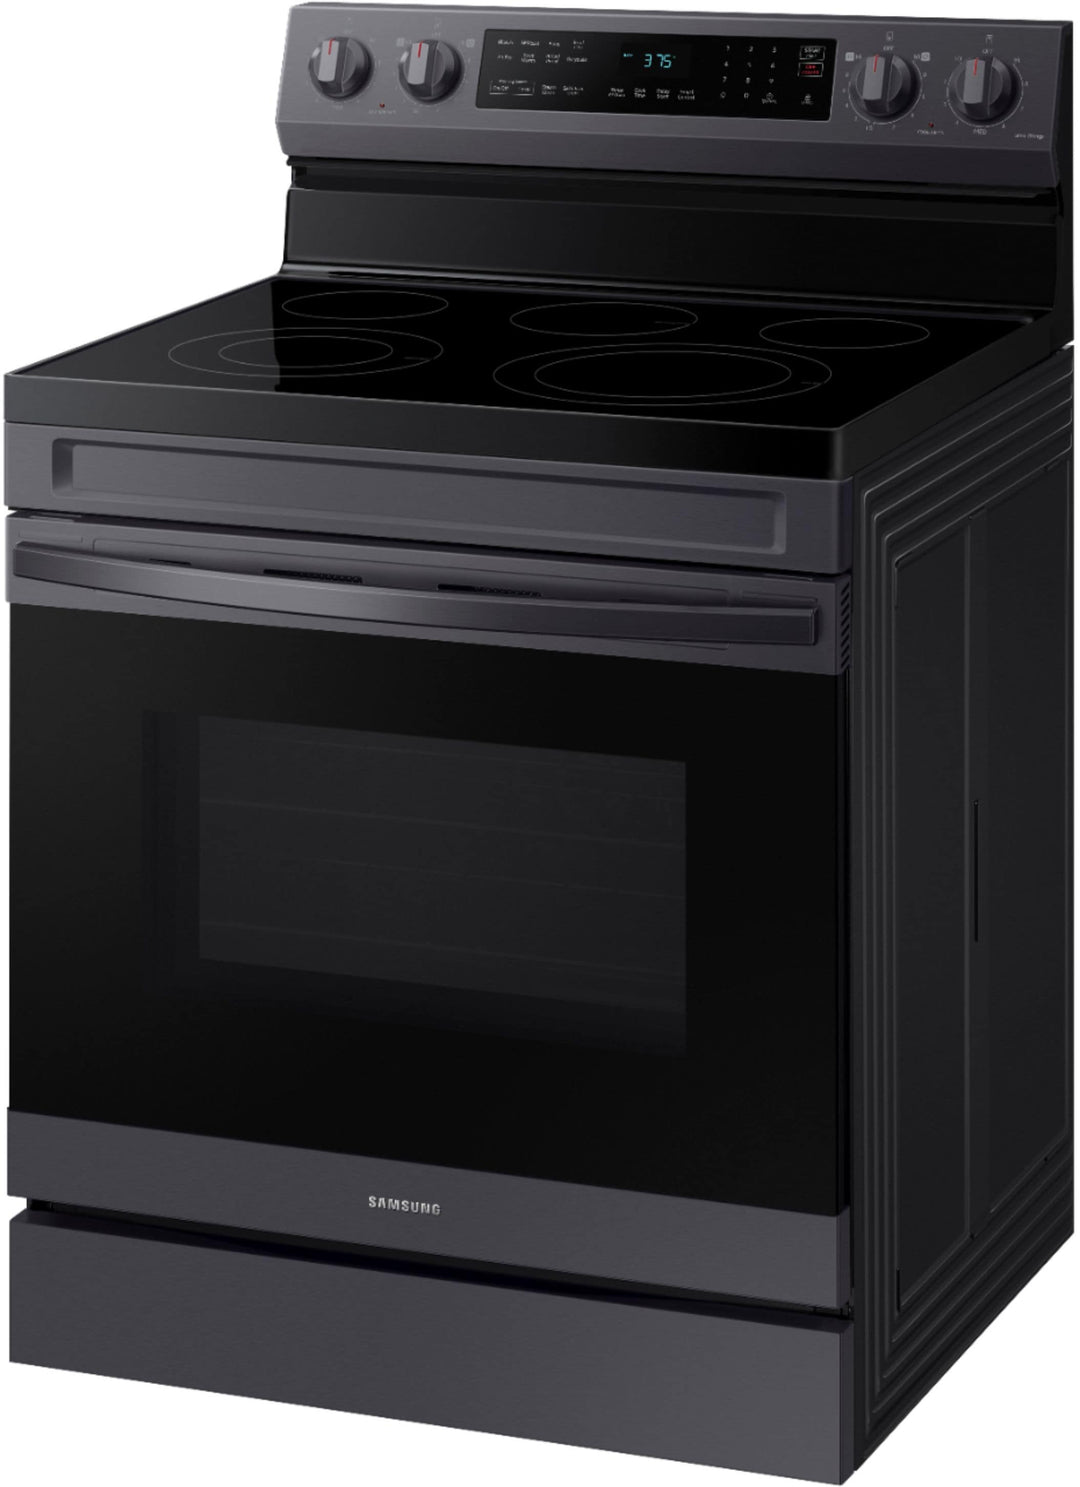 Samsung - 6.3 cu. ft. Freestanding Electric Range with WiFi, No-Preheat Air Fry & Convection - Black stainless steel_4